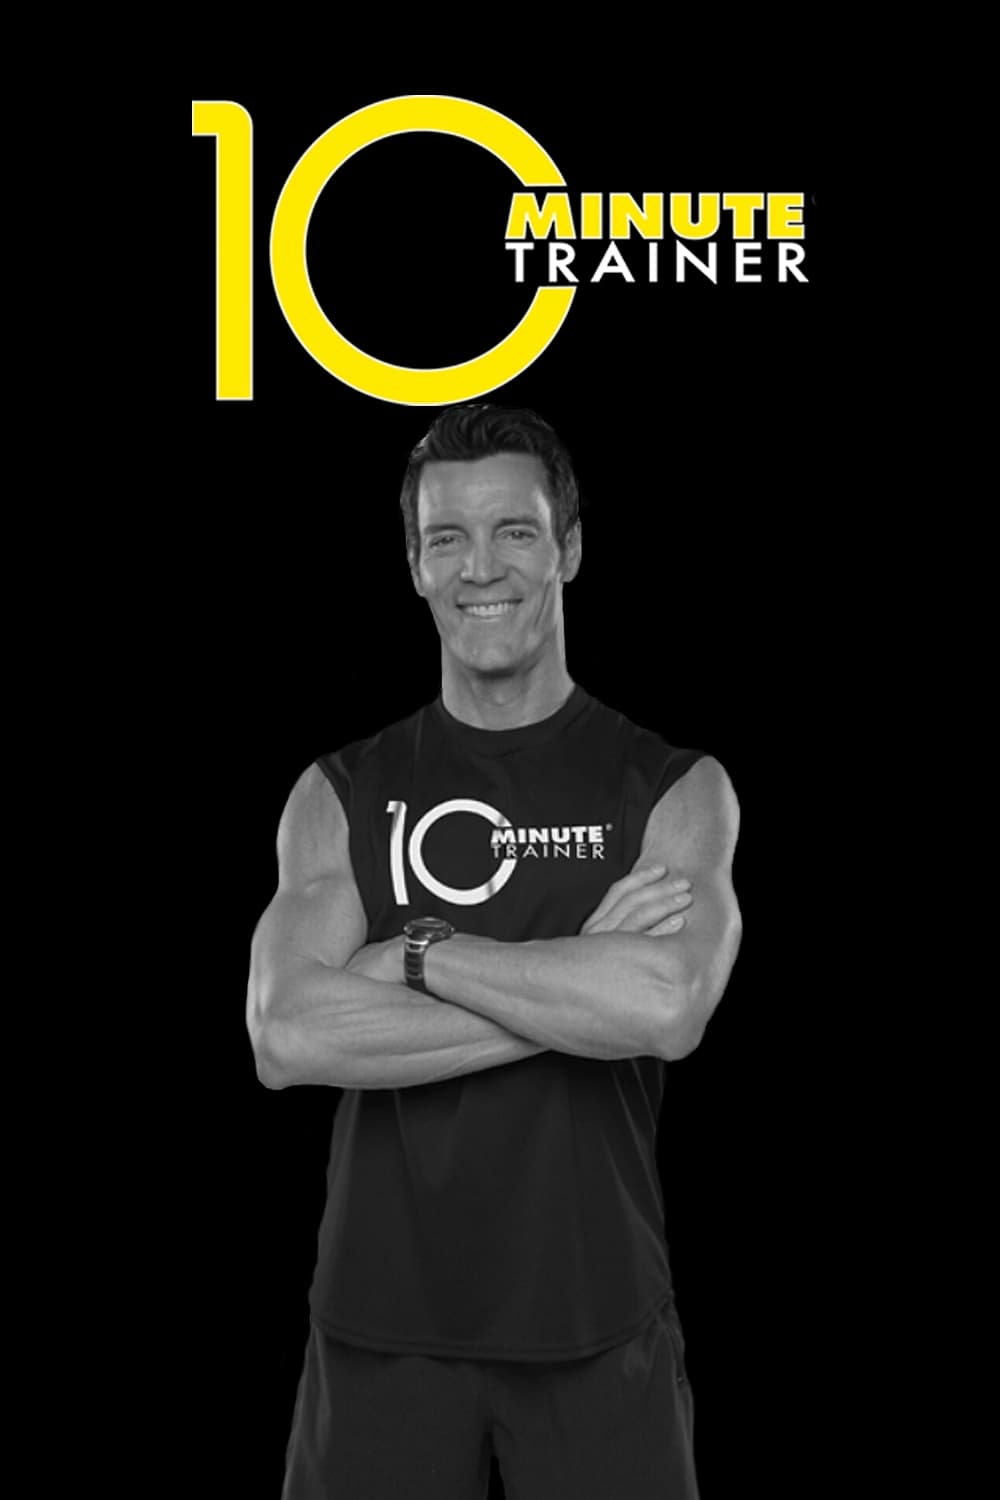 10 Minute Trainer - Total Body